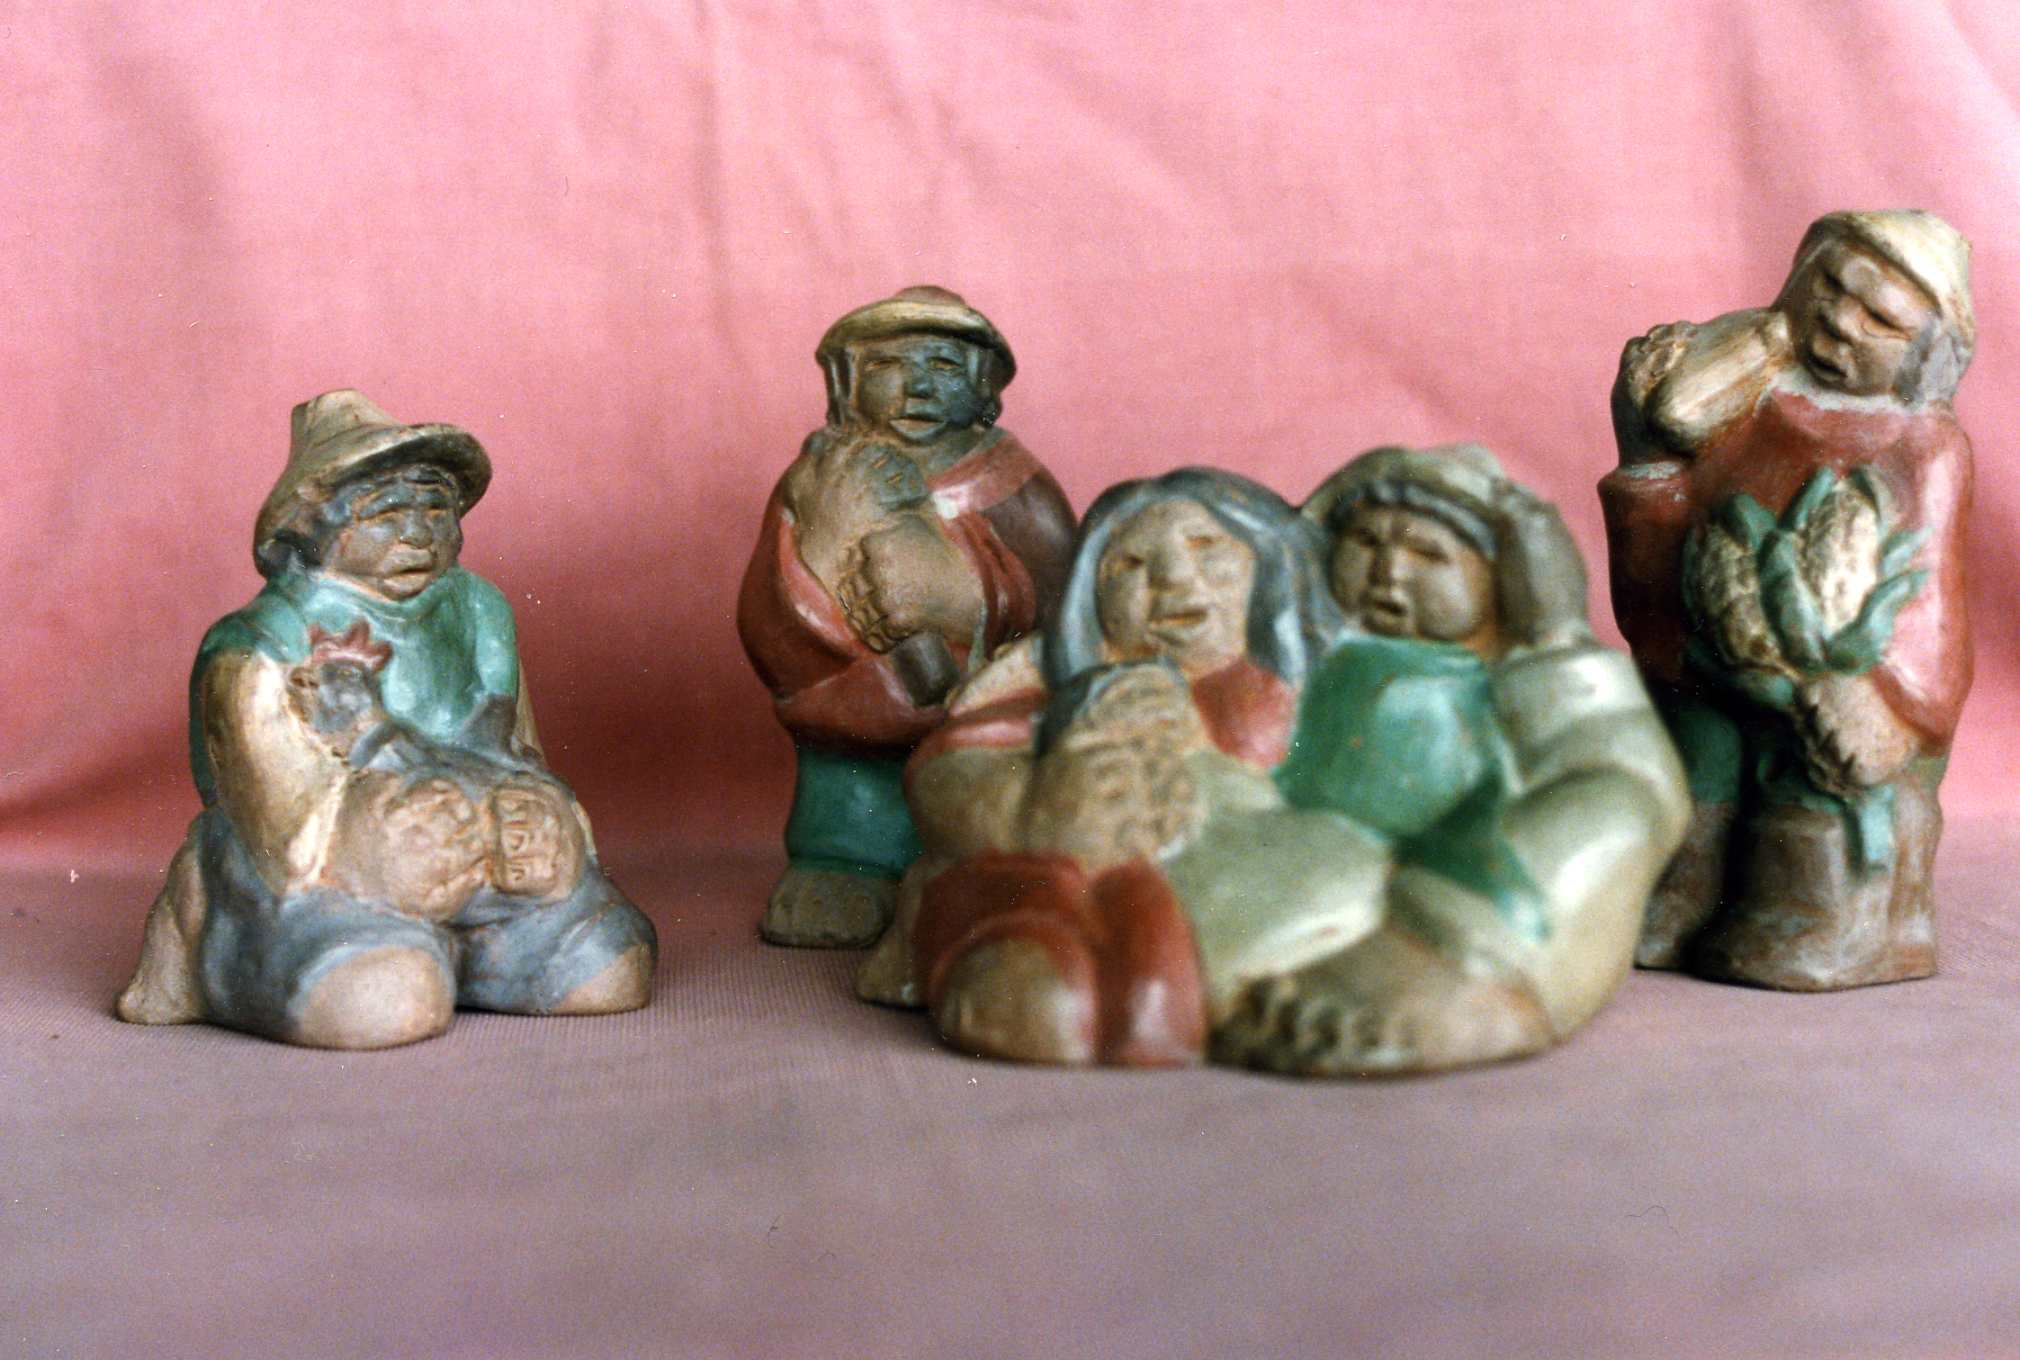 Jean Forster Collection of Crèches (Nativity Scenes) from around the world